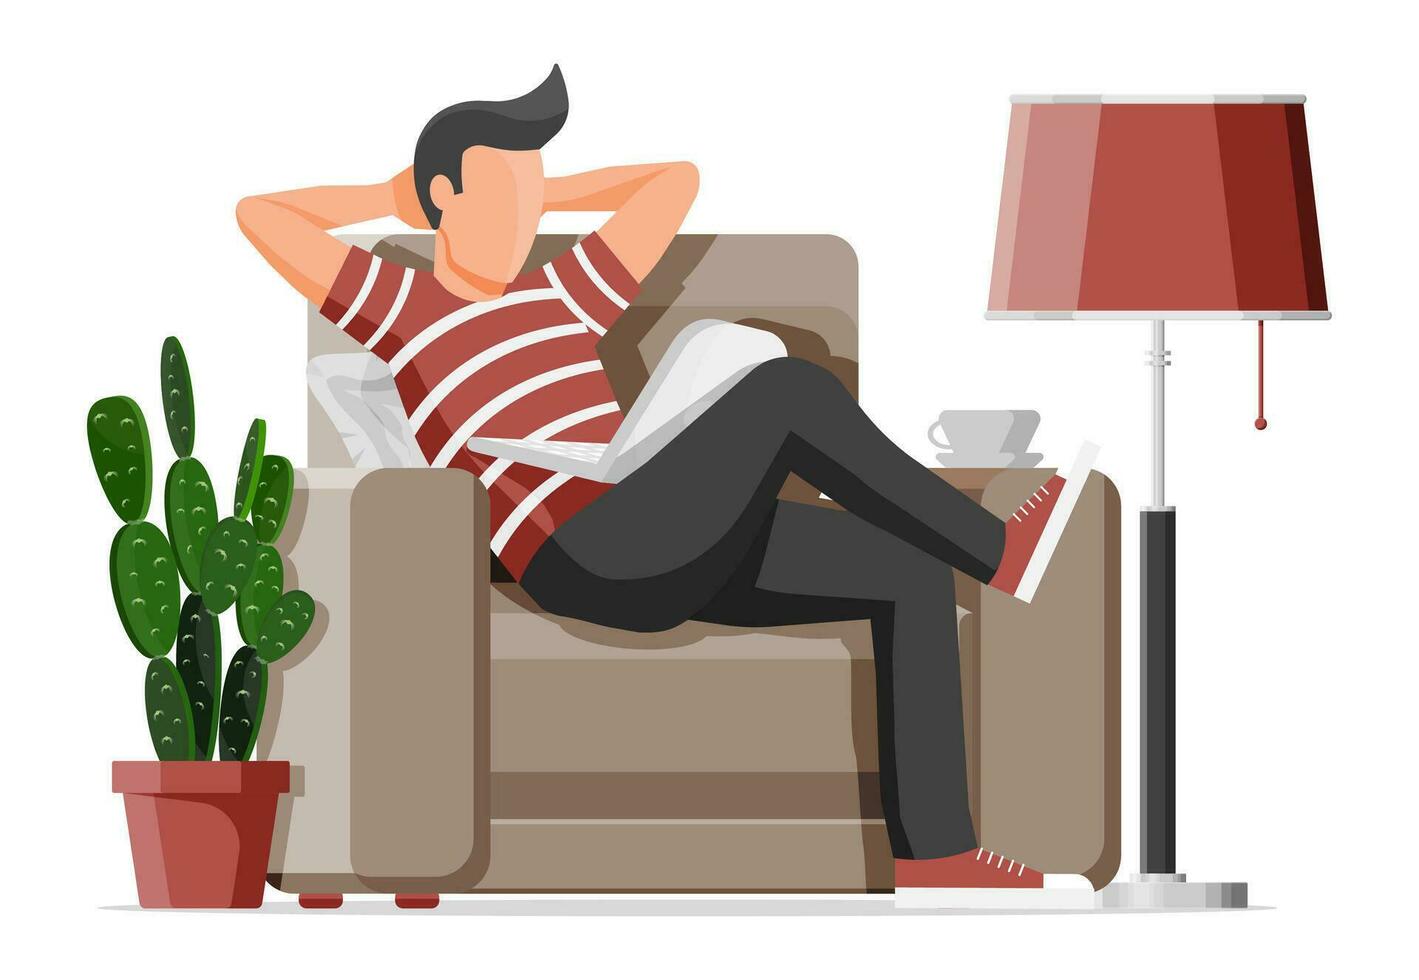 Freelancer guy in armchair works at home. Comfortable workplace interior with plant, floor lamp. Young man in chair with laptop, cup of drink. Remote work online education. Flat vector illustration